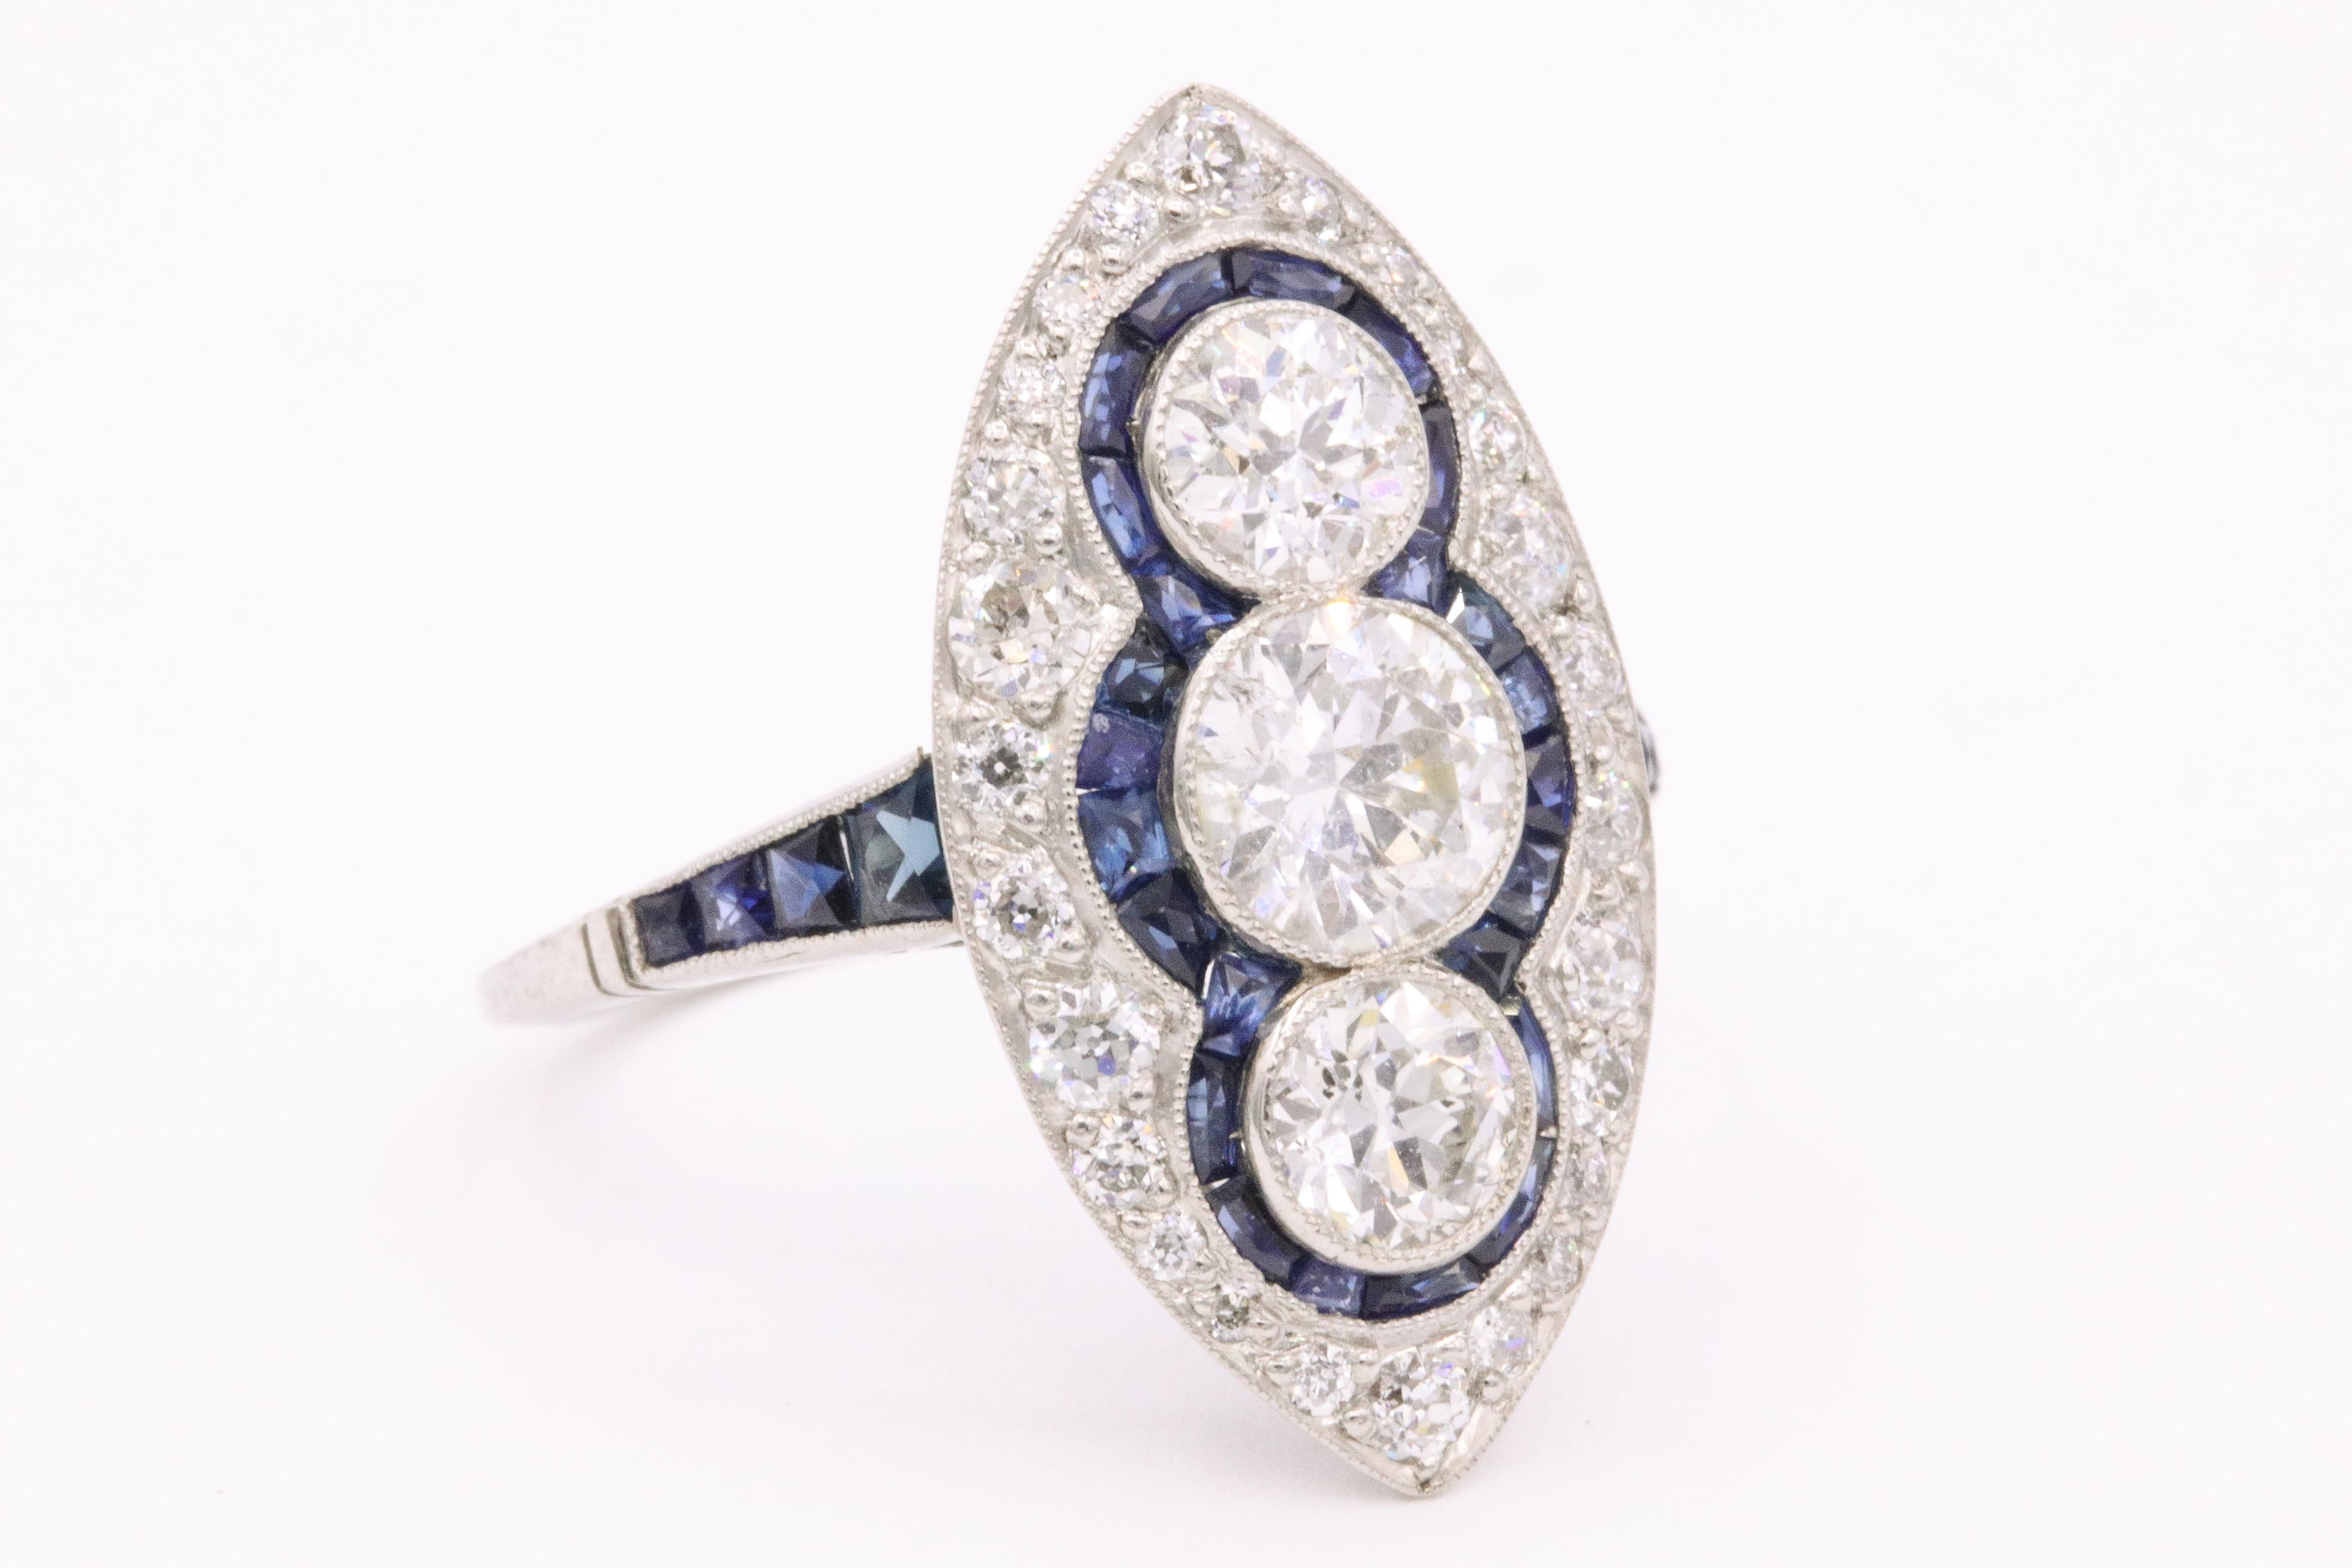 Platinum Art Deco inspired ring featuring three round diamonds weighing approximately 2 carats flanked with blue sapphires weighing approximately 1 carat. Great looking on the finger!

The ring measures 1 inch long and 1/2 inch wide.   